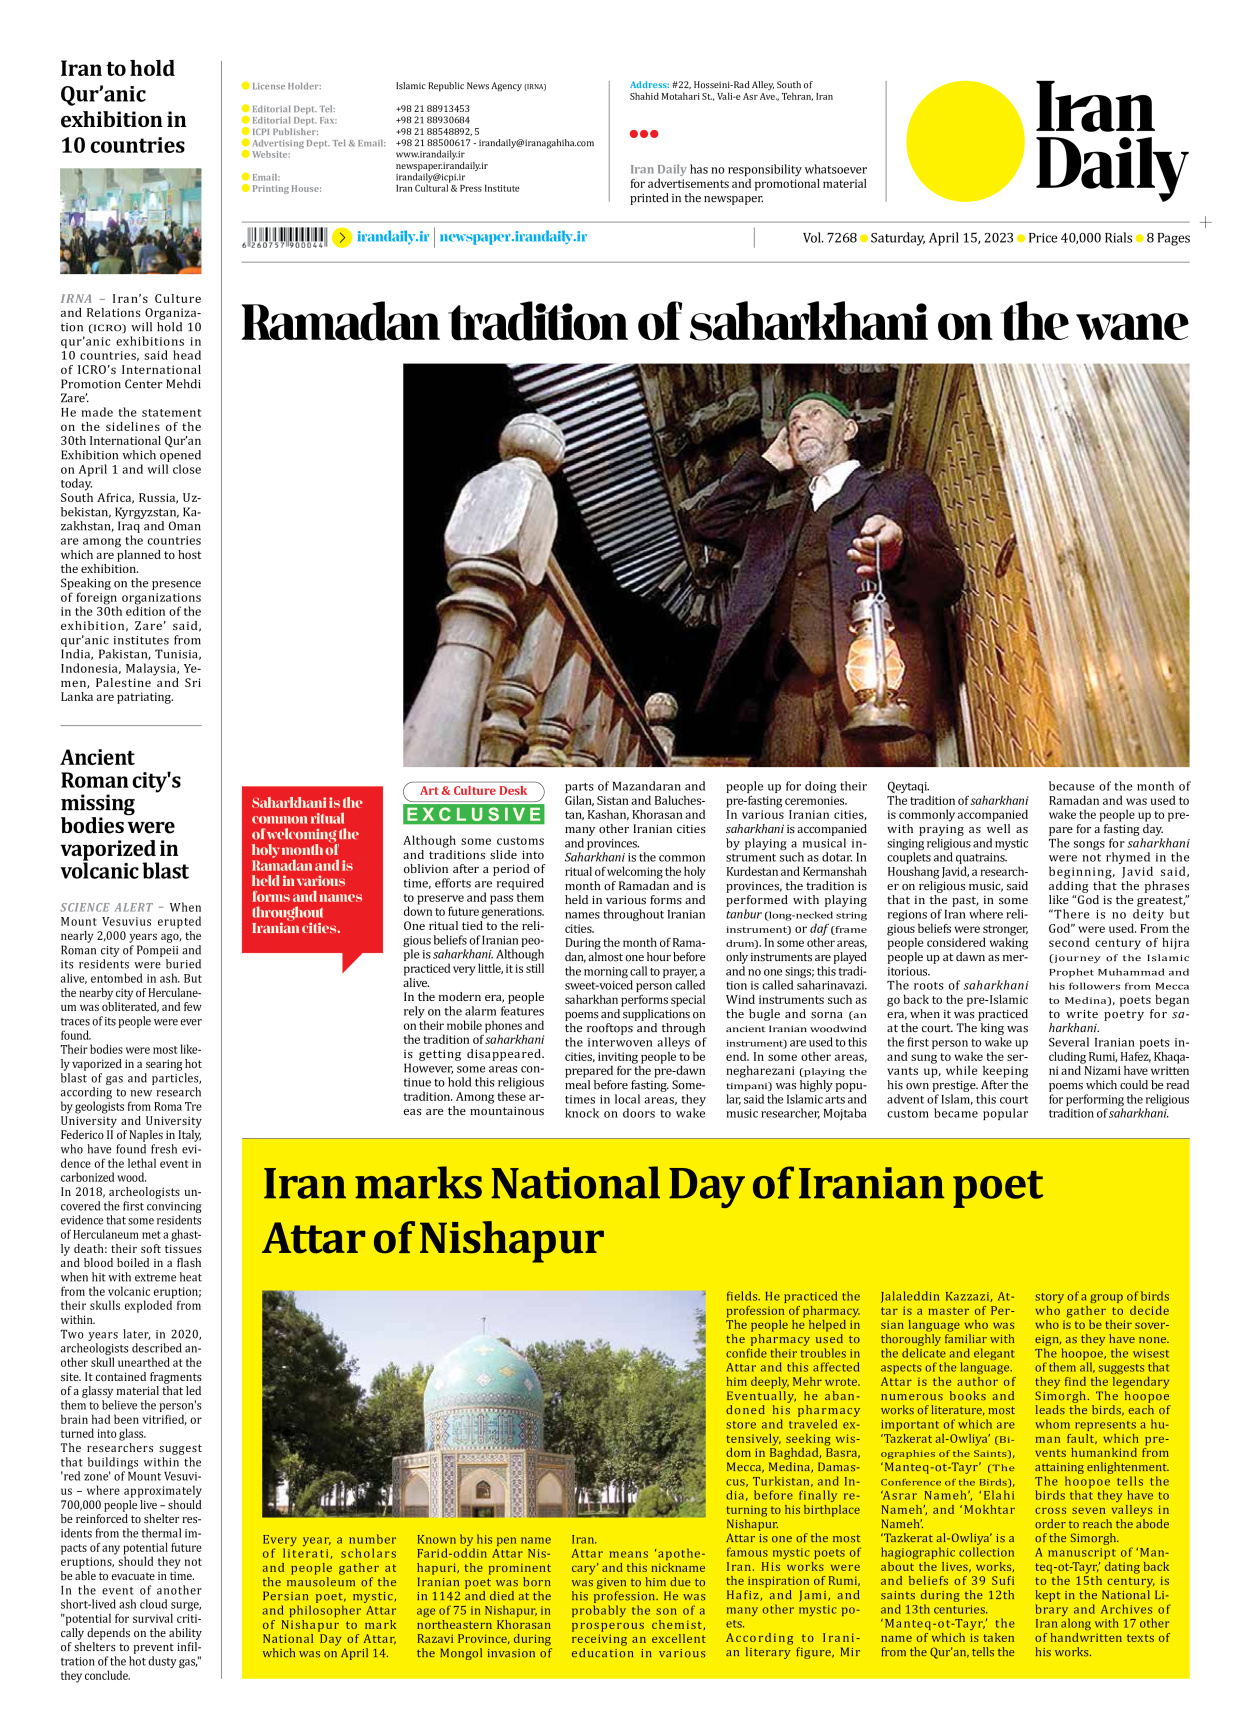 Iran Daily - Number Seven Thousand Two Hundred and Sixty Eight - 15 April 2023 - Page 8